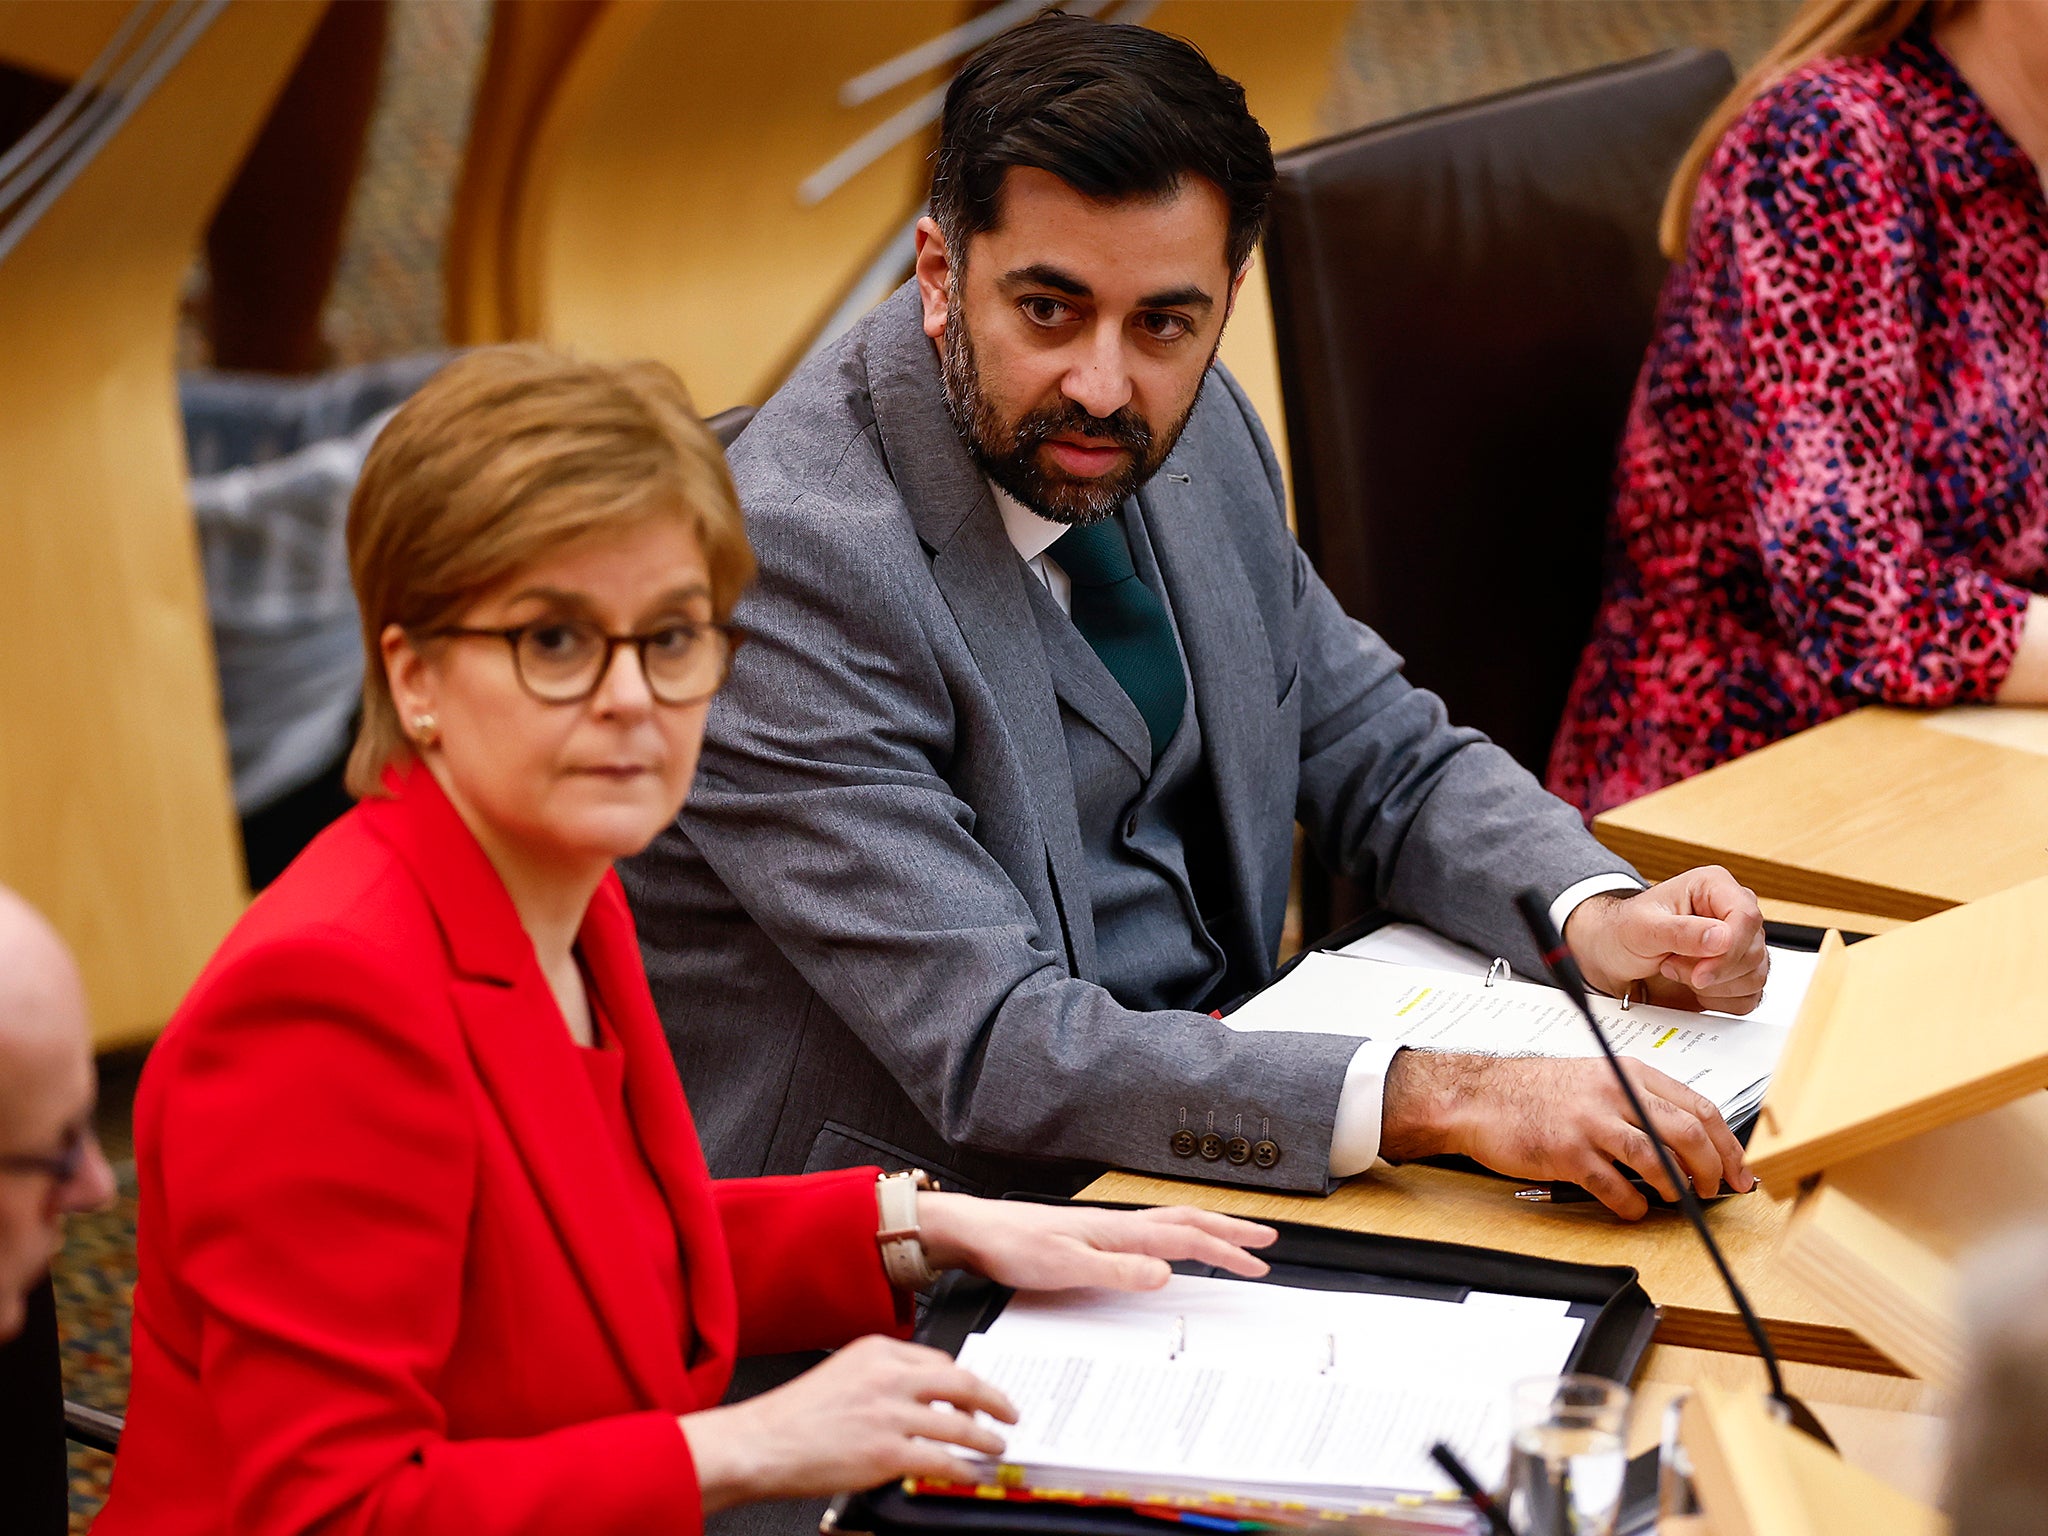 Yousaf argued that Sturgeon did not shut ministers out of decision-making meetings